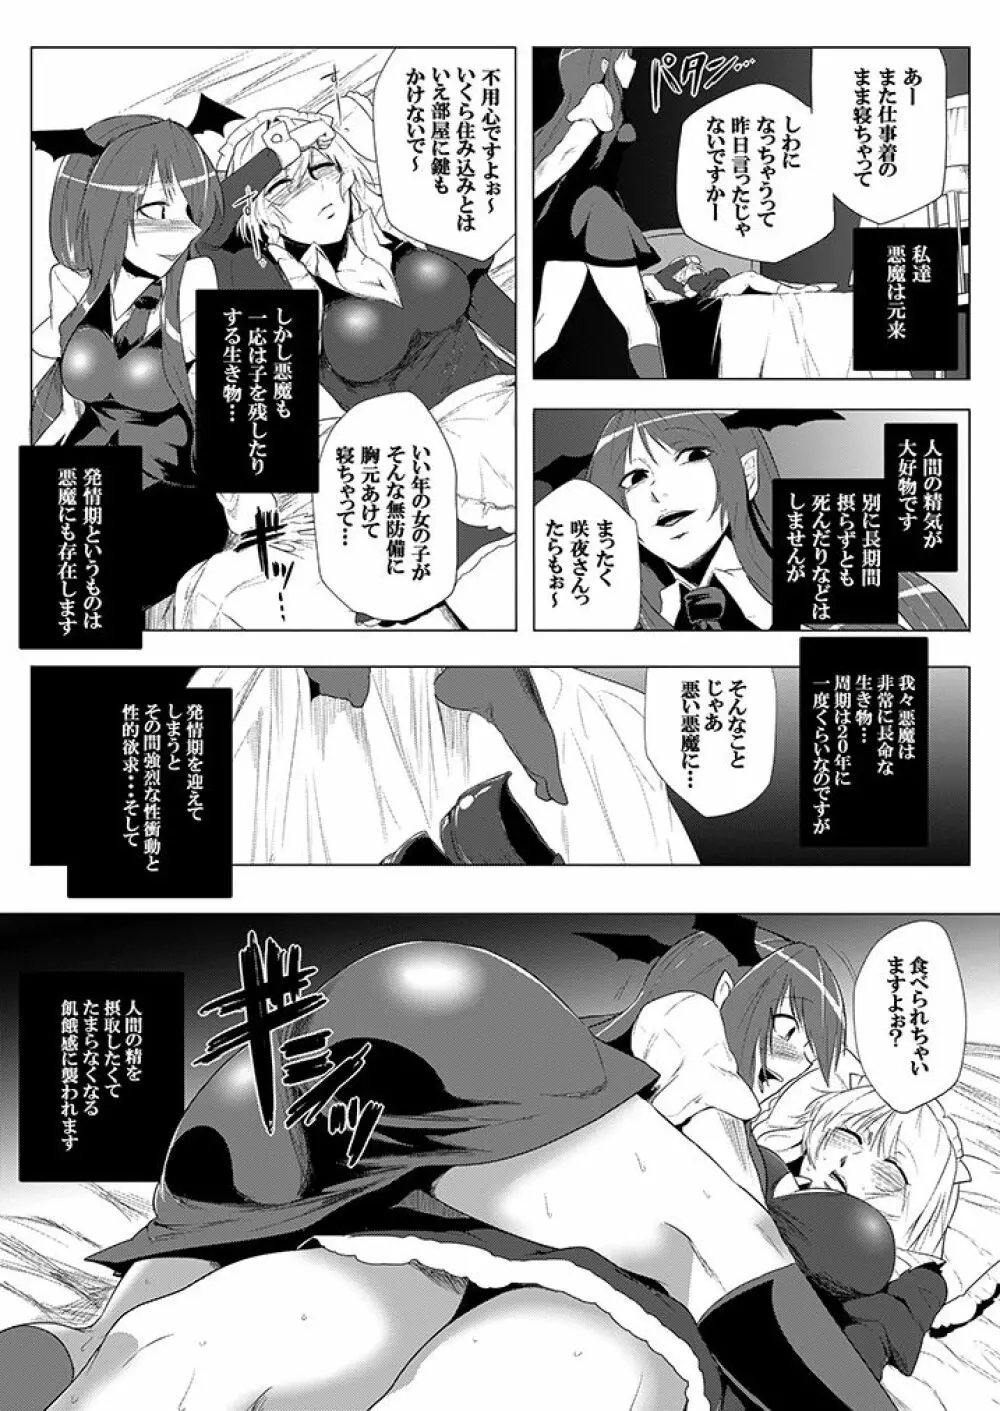 SAKUYA MAID in HEAVEN/ALL IN 1 - page11